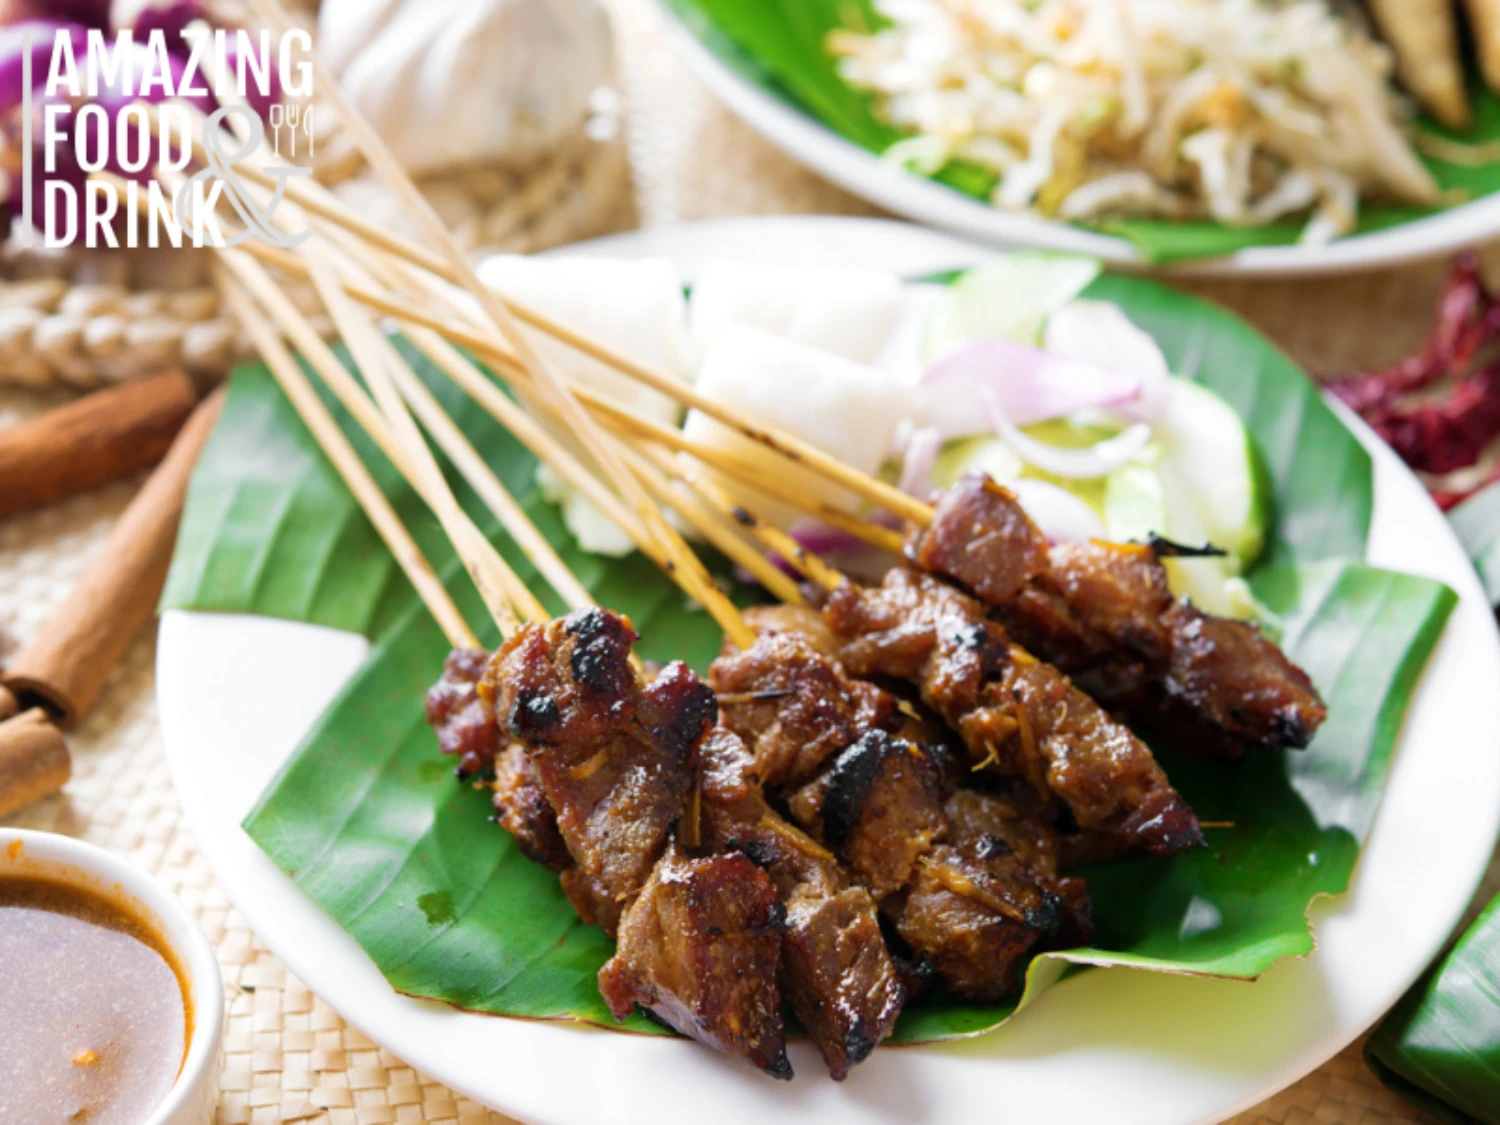 Satay or sate, skewered and grilled meat, served with peanut sauce, cucumber and ketupat, Malaysia or Indonesia food. Traditional Malay food. Hot and spicy Malaysian dish, Asian cuisine.